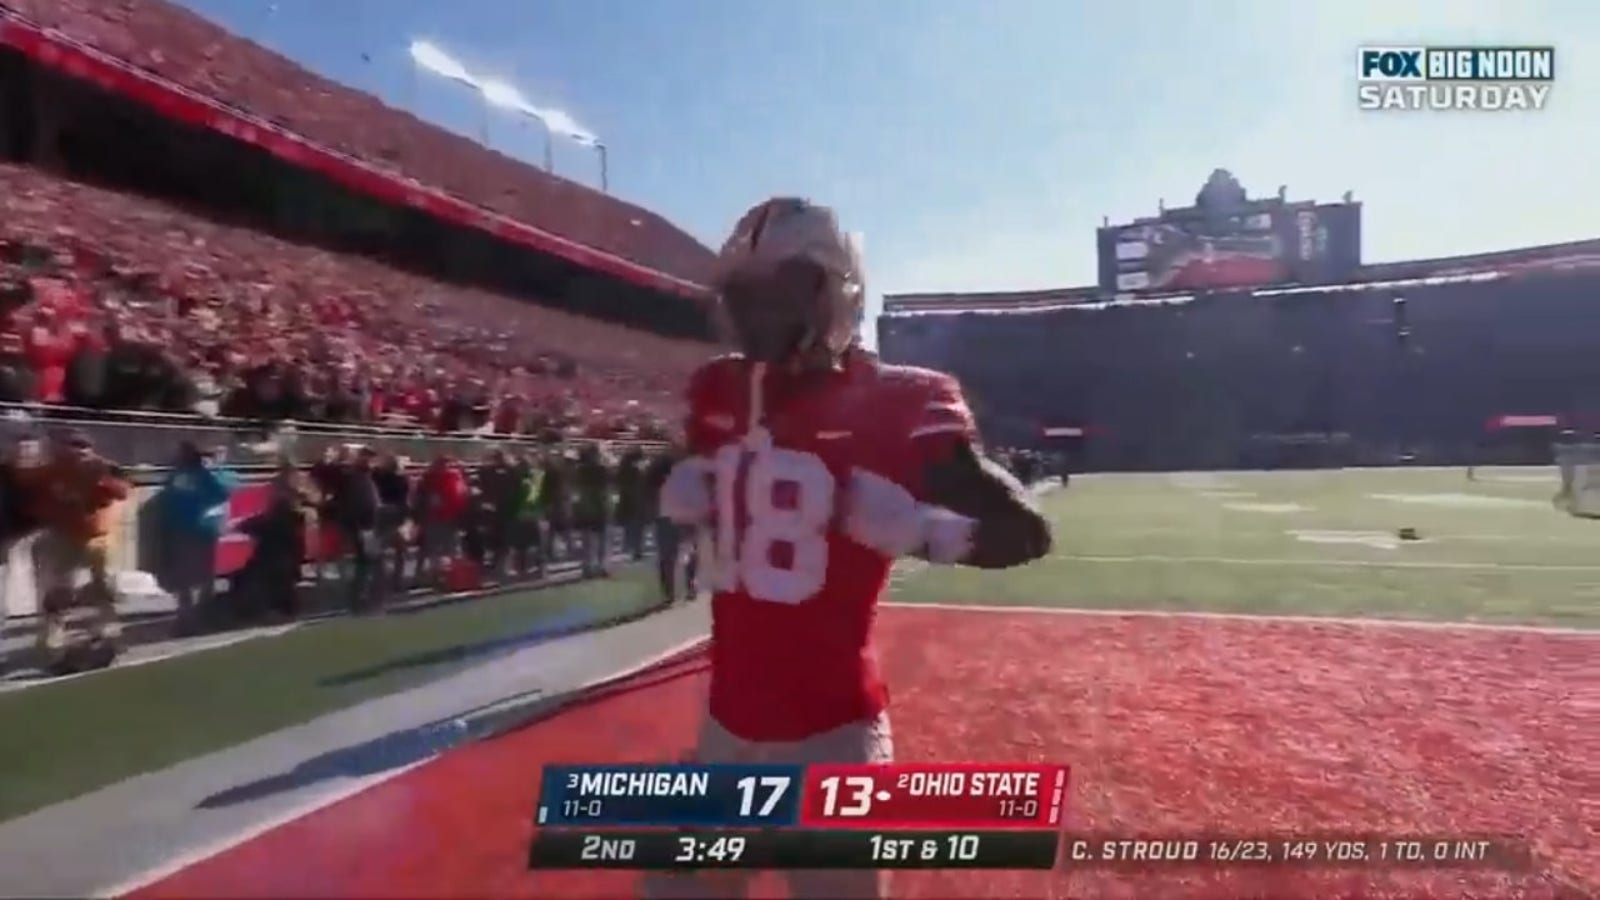 Ohio State's CJ Stroud beats Marvin Harrison Jr. for the 42-yard touchdown